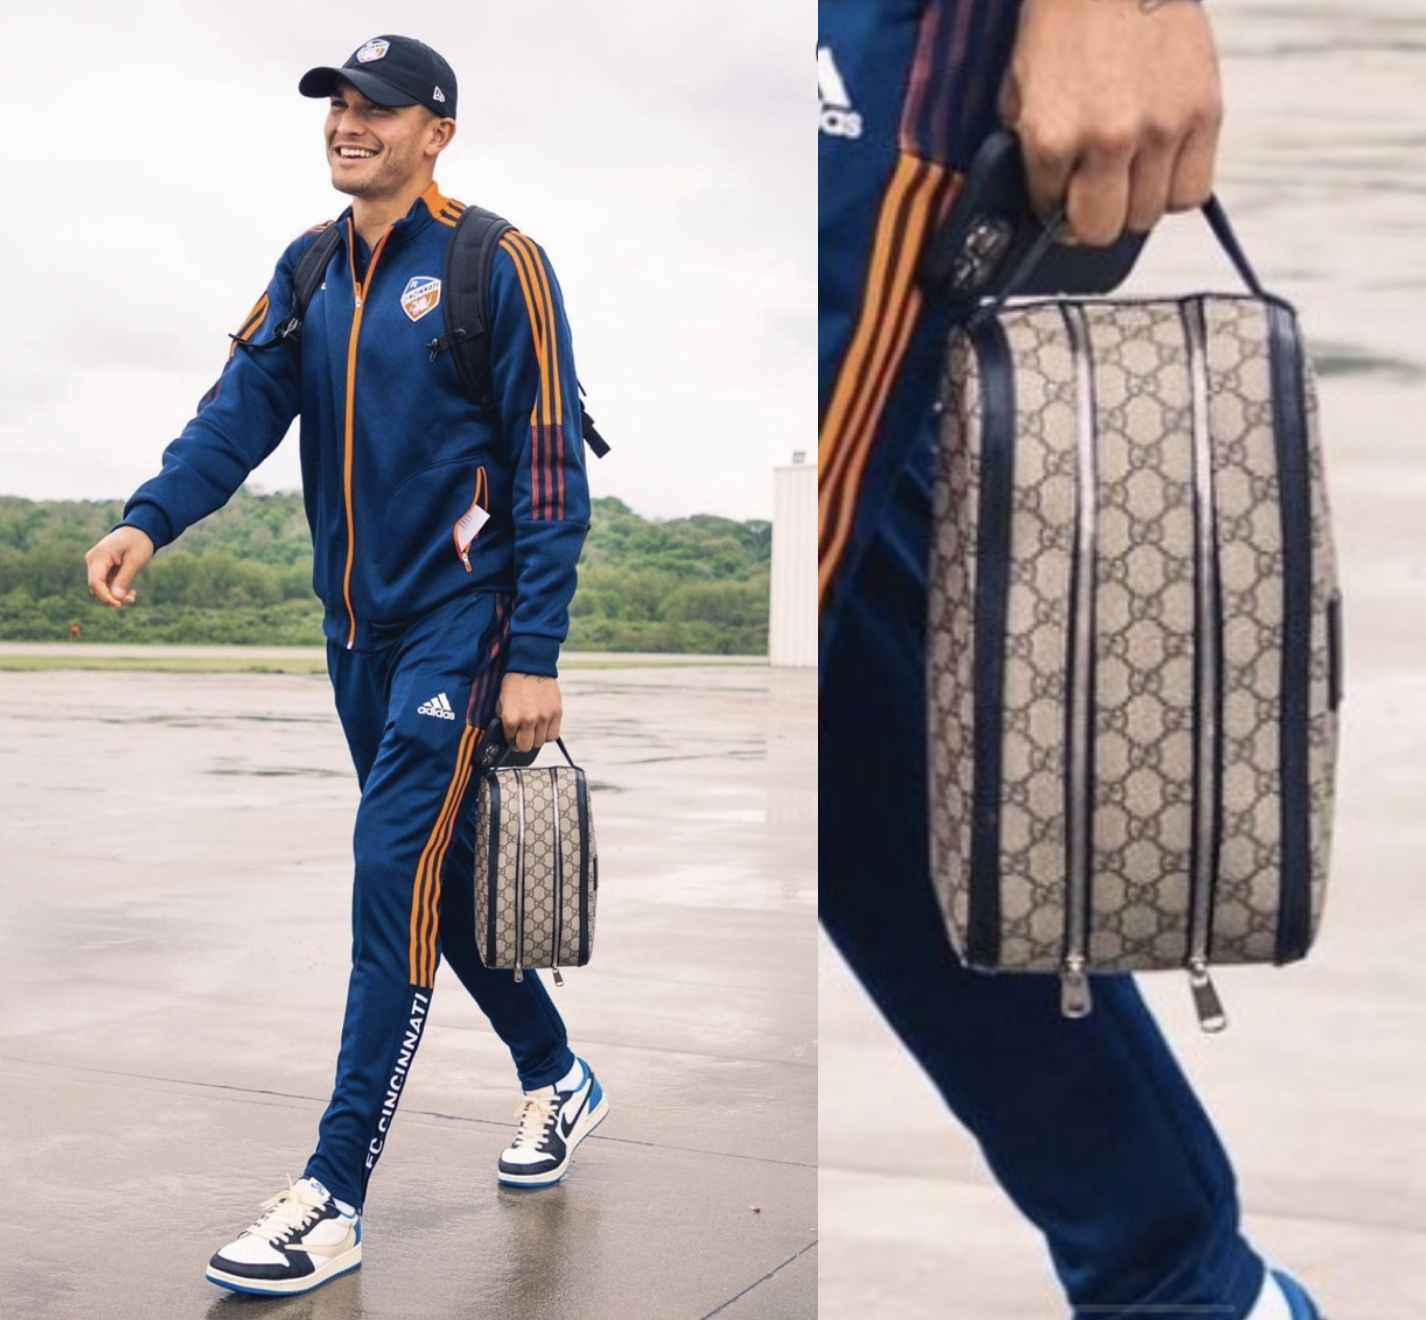 What's up with those Tiny Bags Soccer Players are Always Carrying